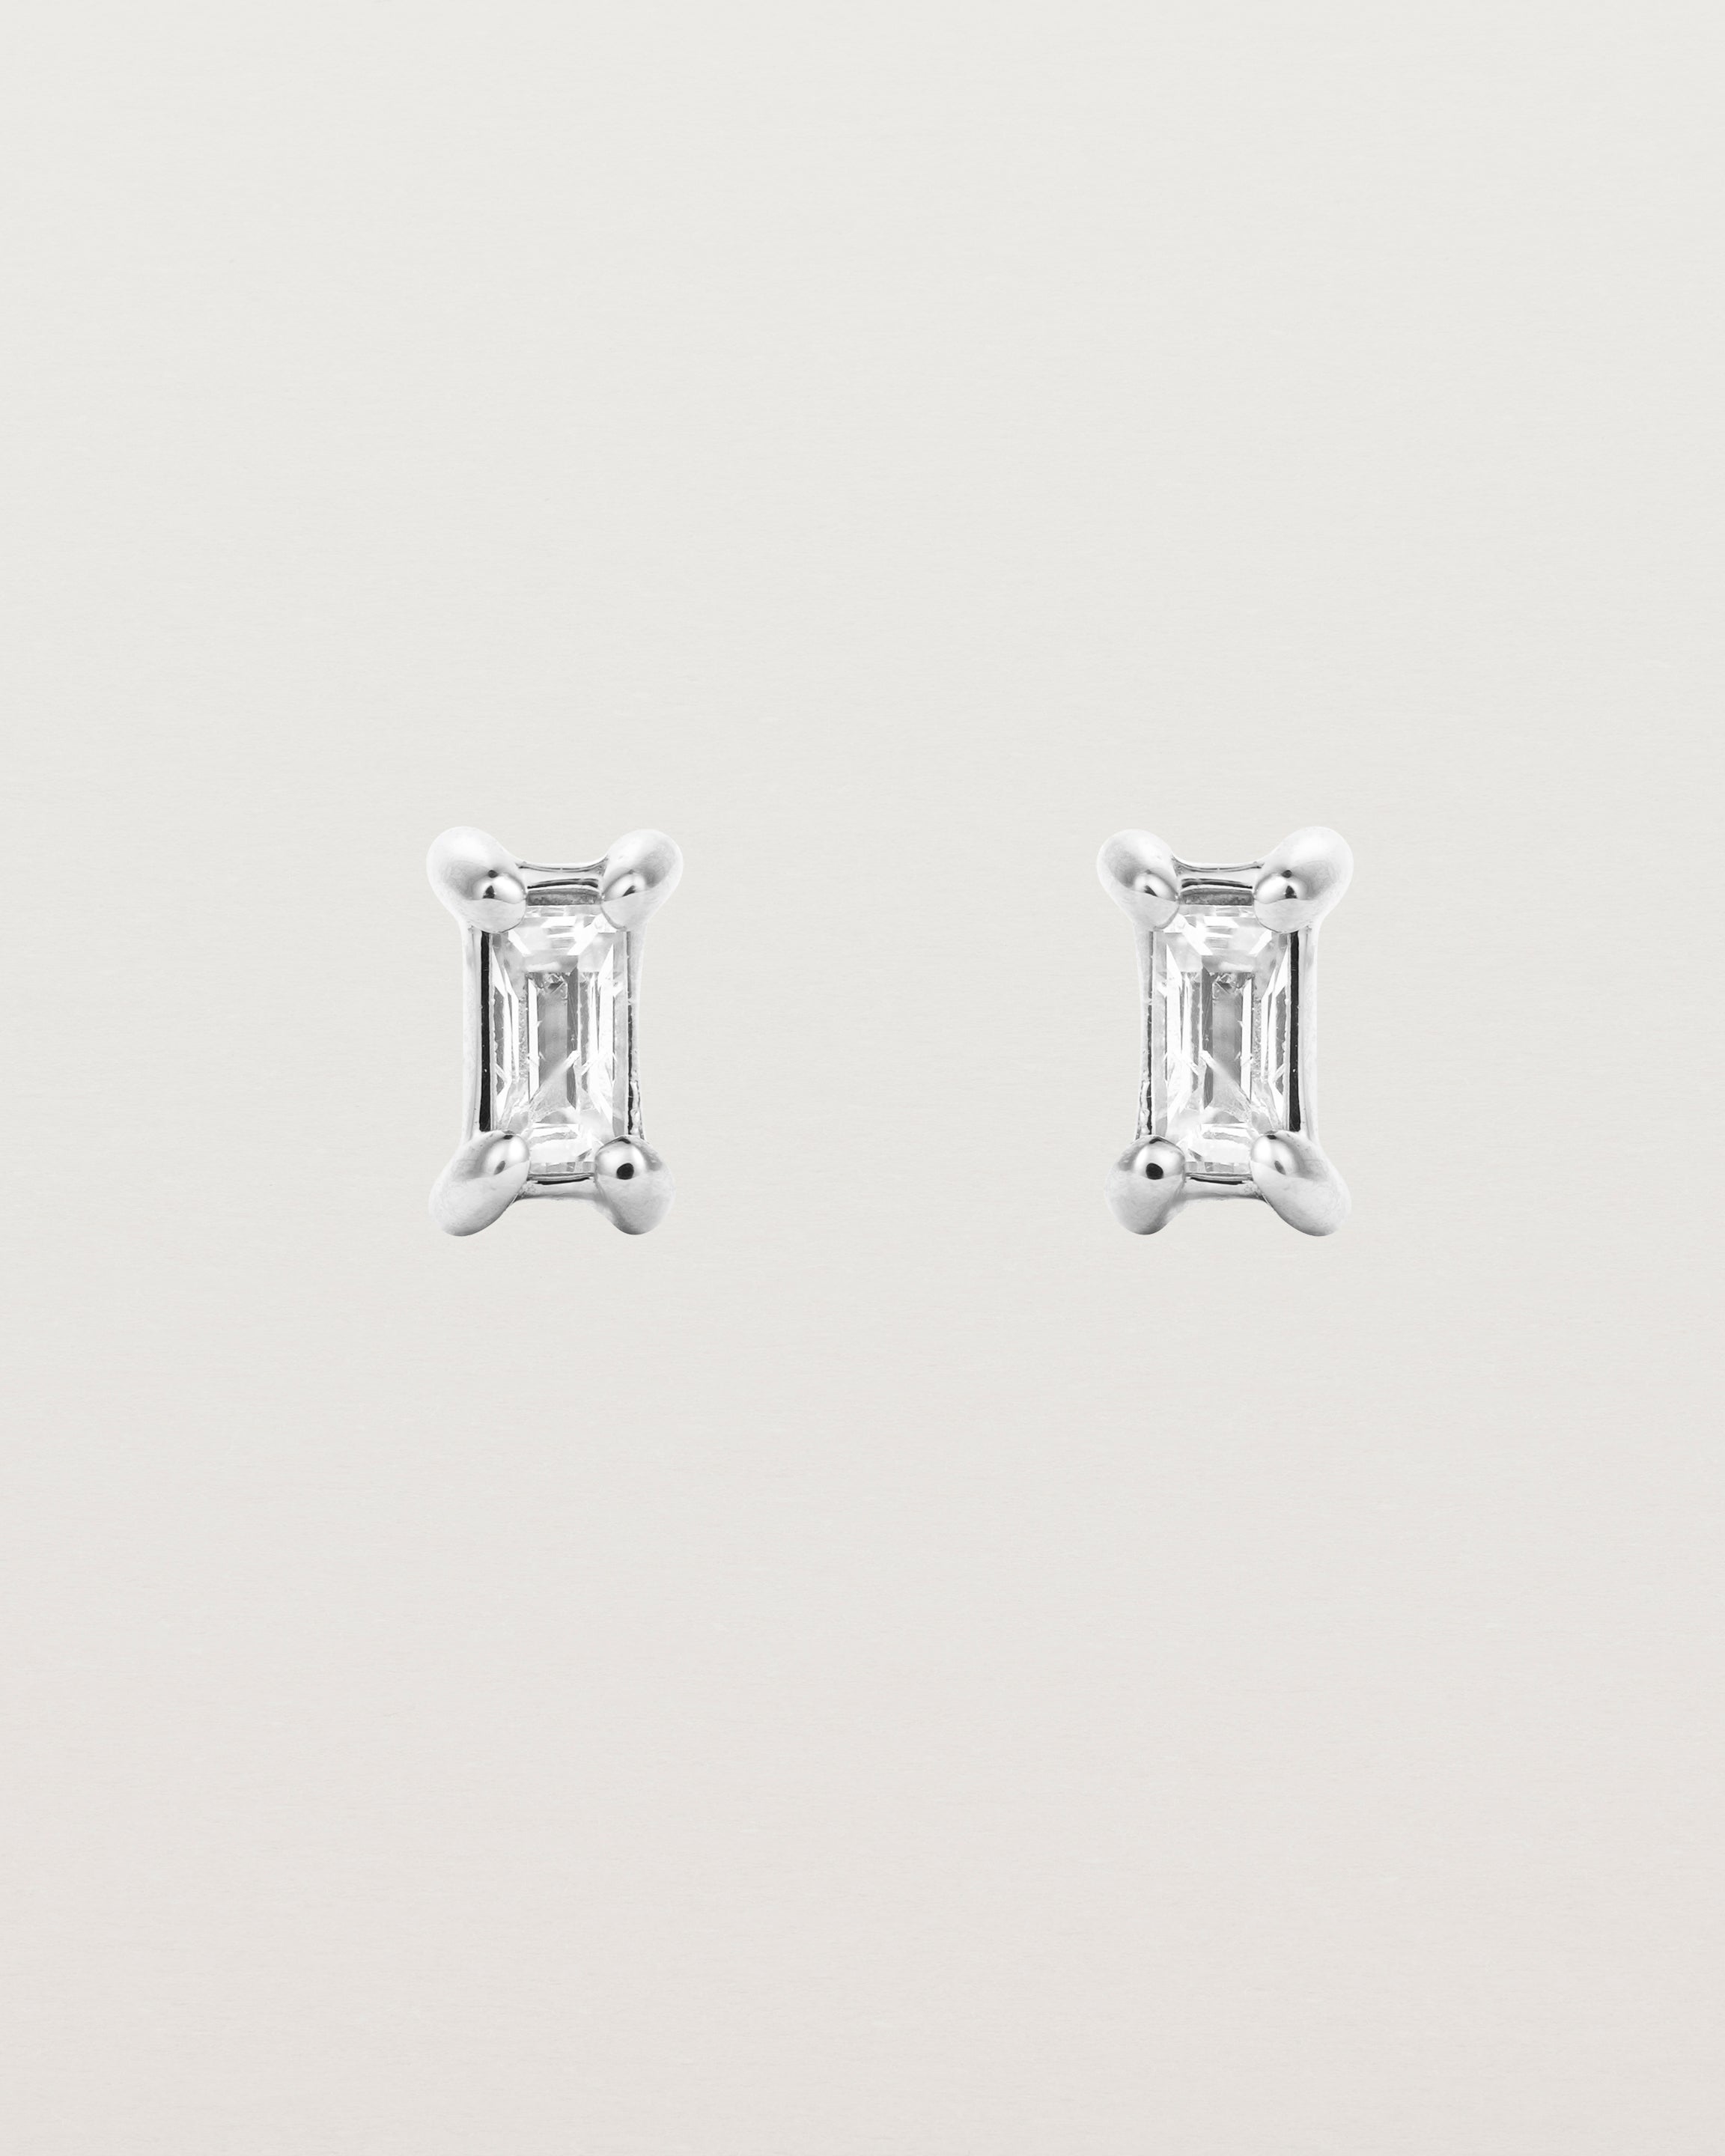 A pair of sterling silver studs featuring an emerald cut white diamond